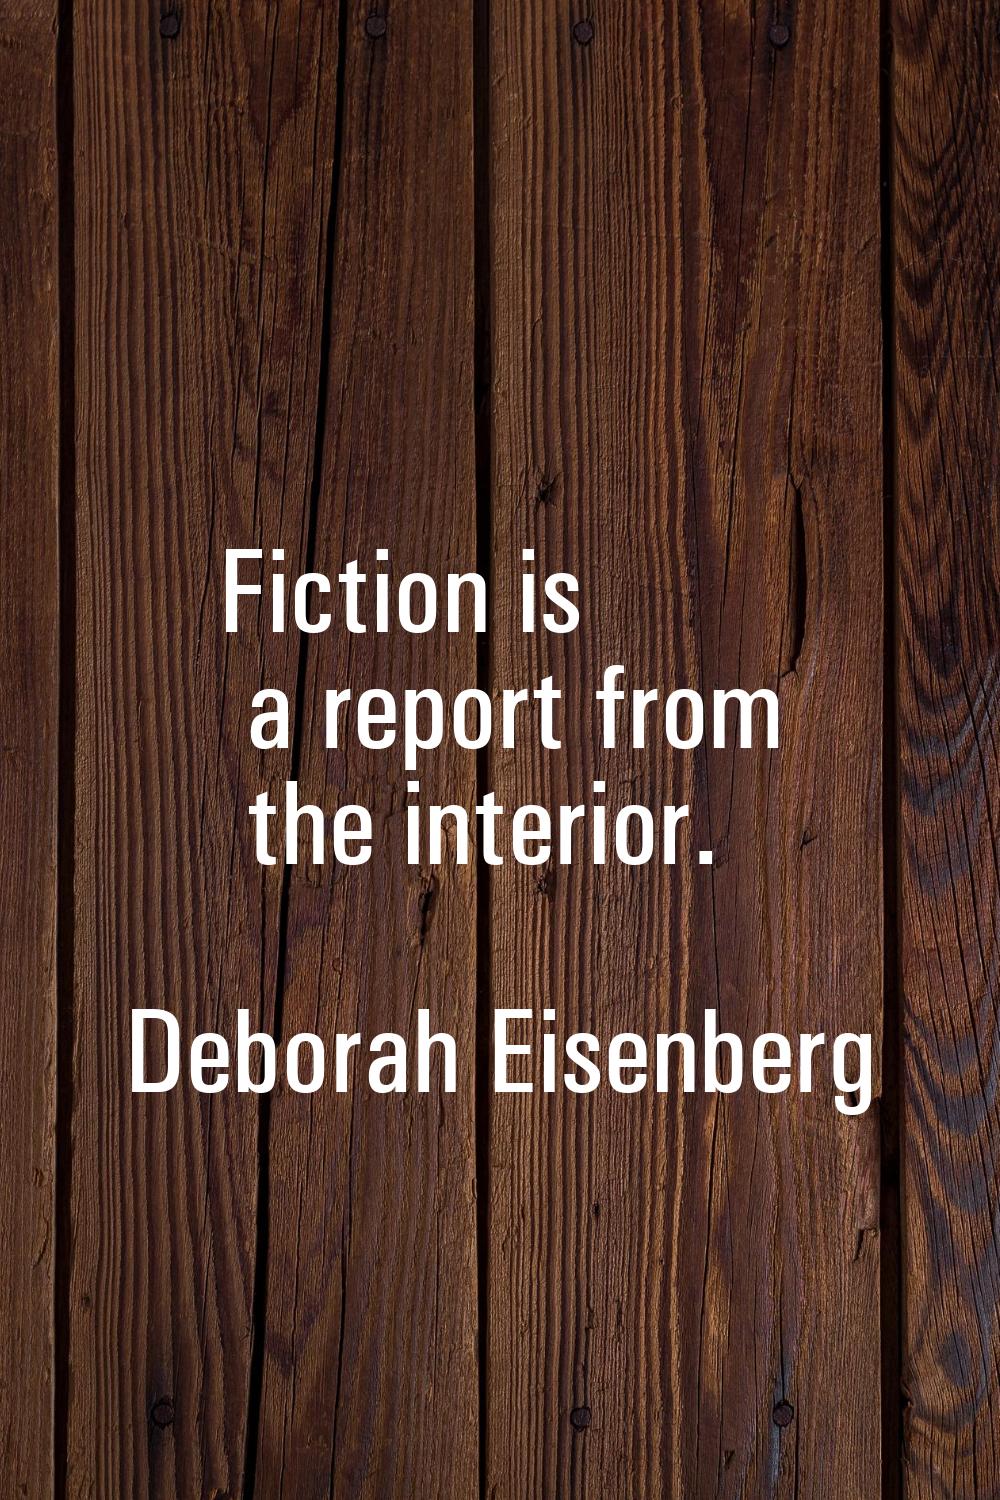 Fiction is a report from the interior.